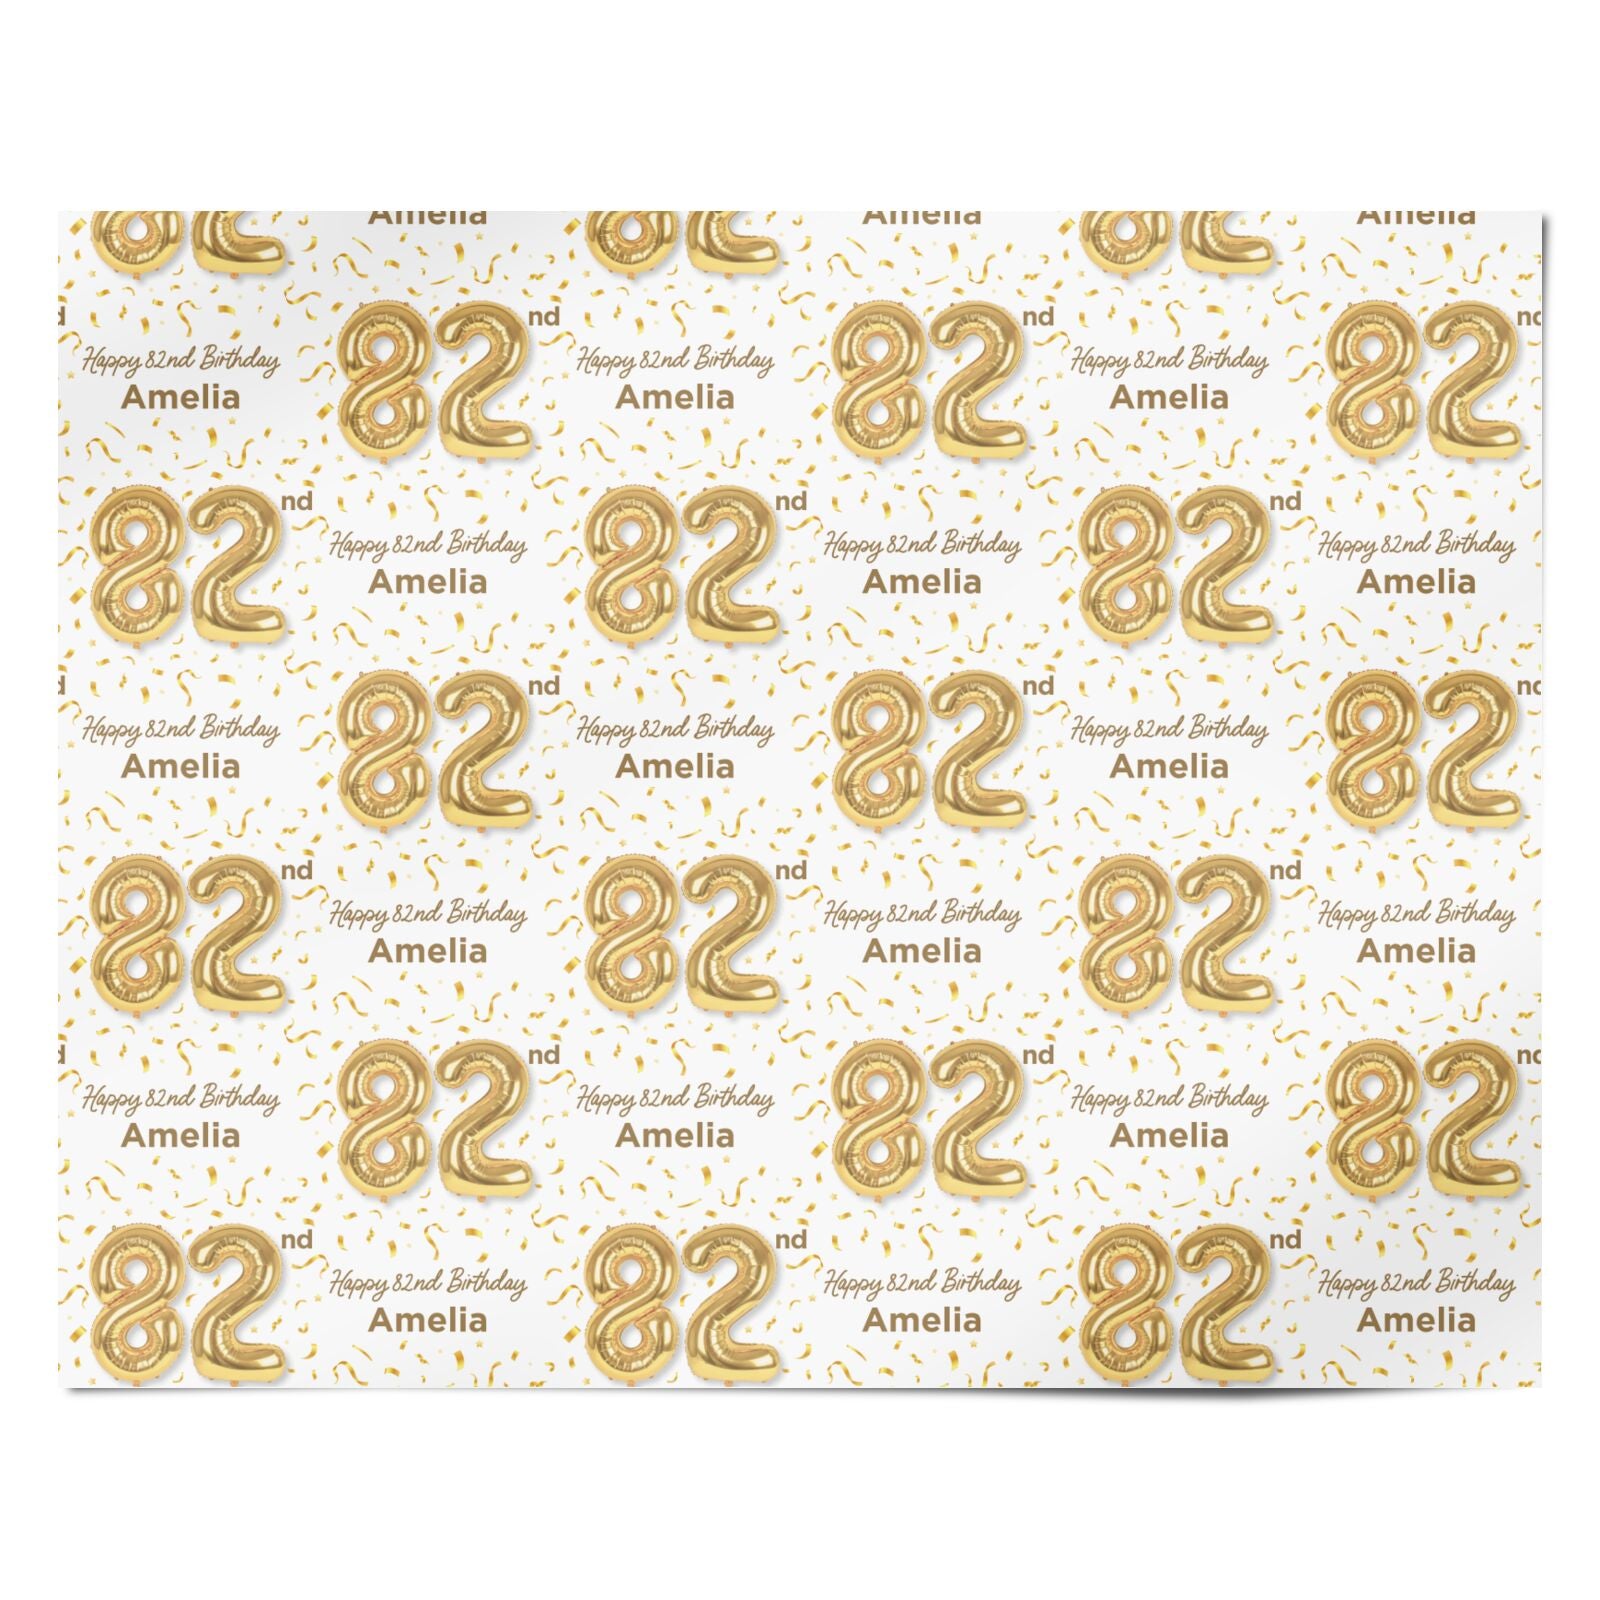 Personalised 82nd Birthday Personalised Wrapping Paper Alternative